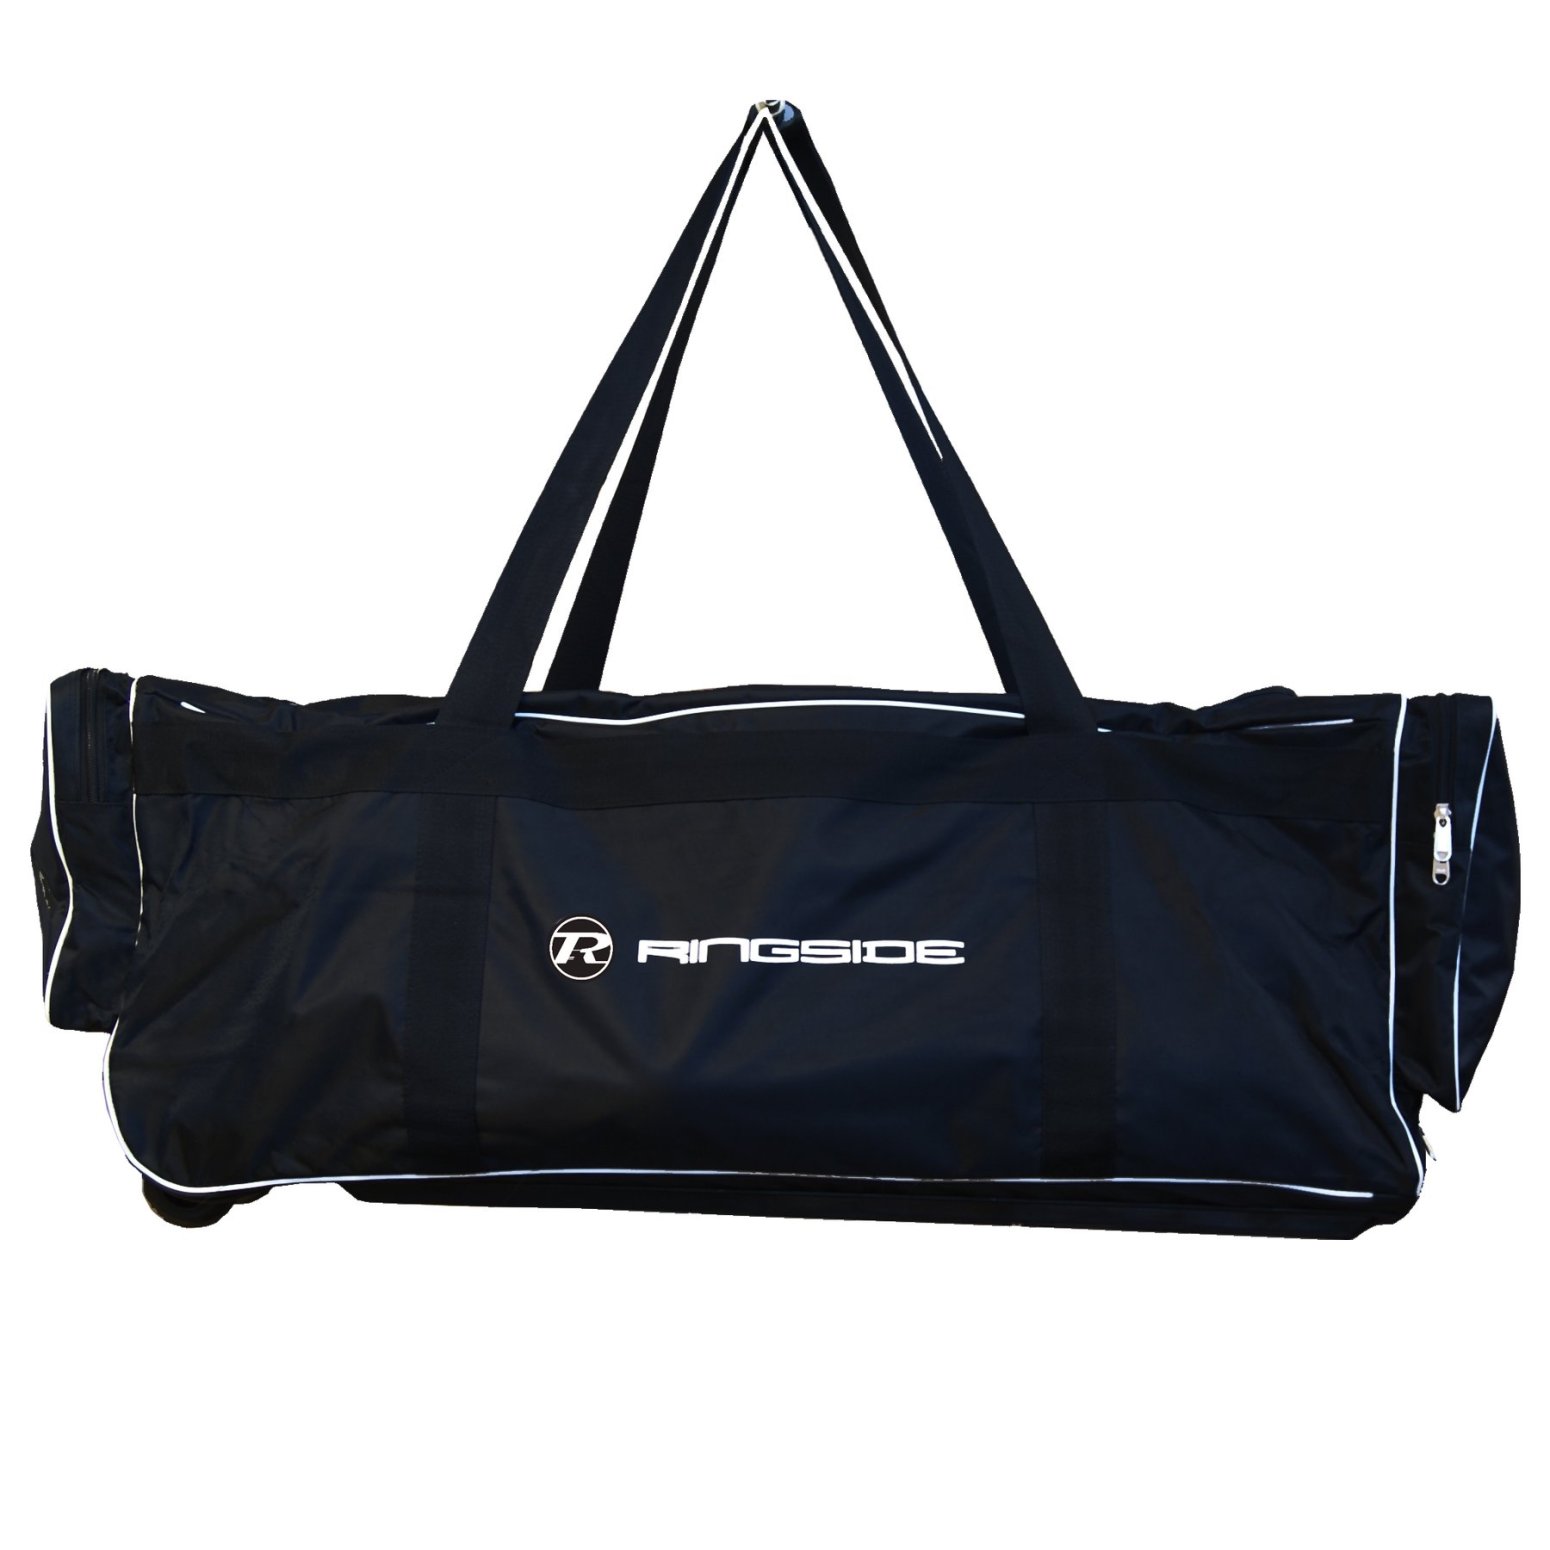 RingSide Boxing Coaches Large Trolley Equipment Bag - Click Image to Close